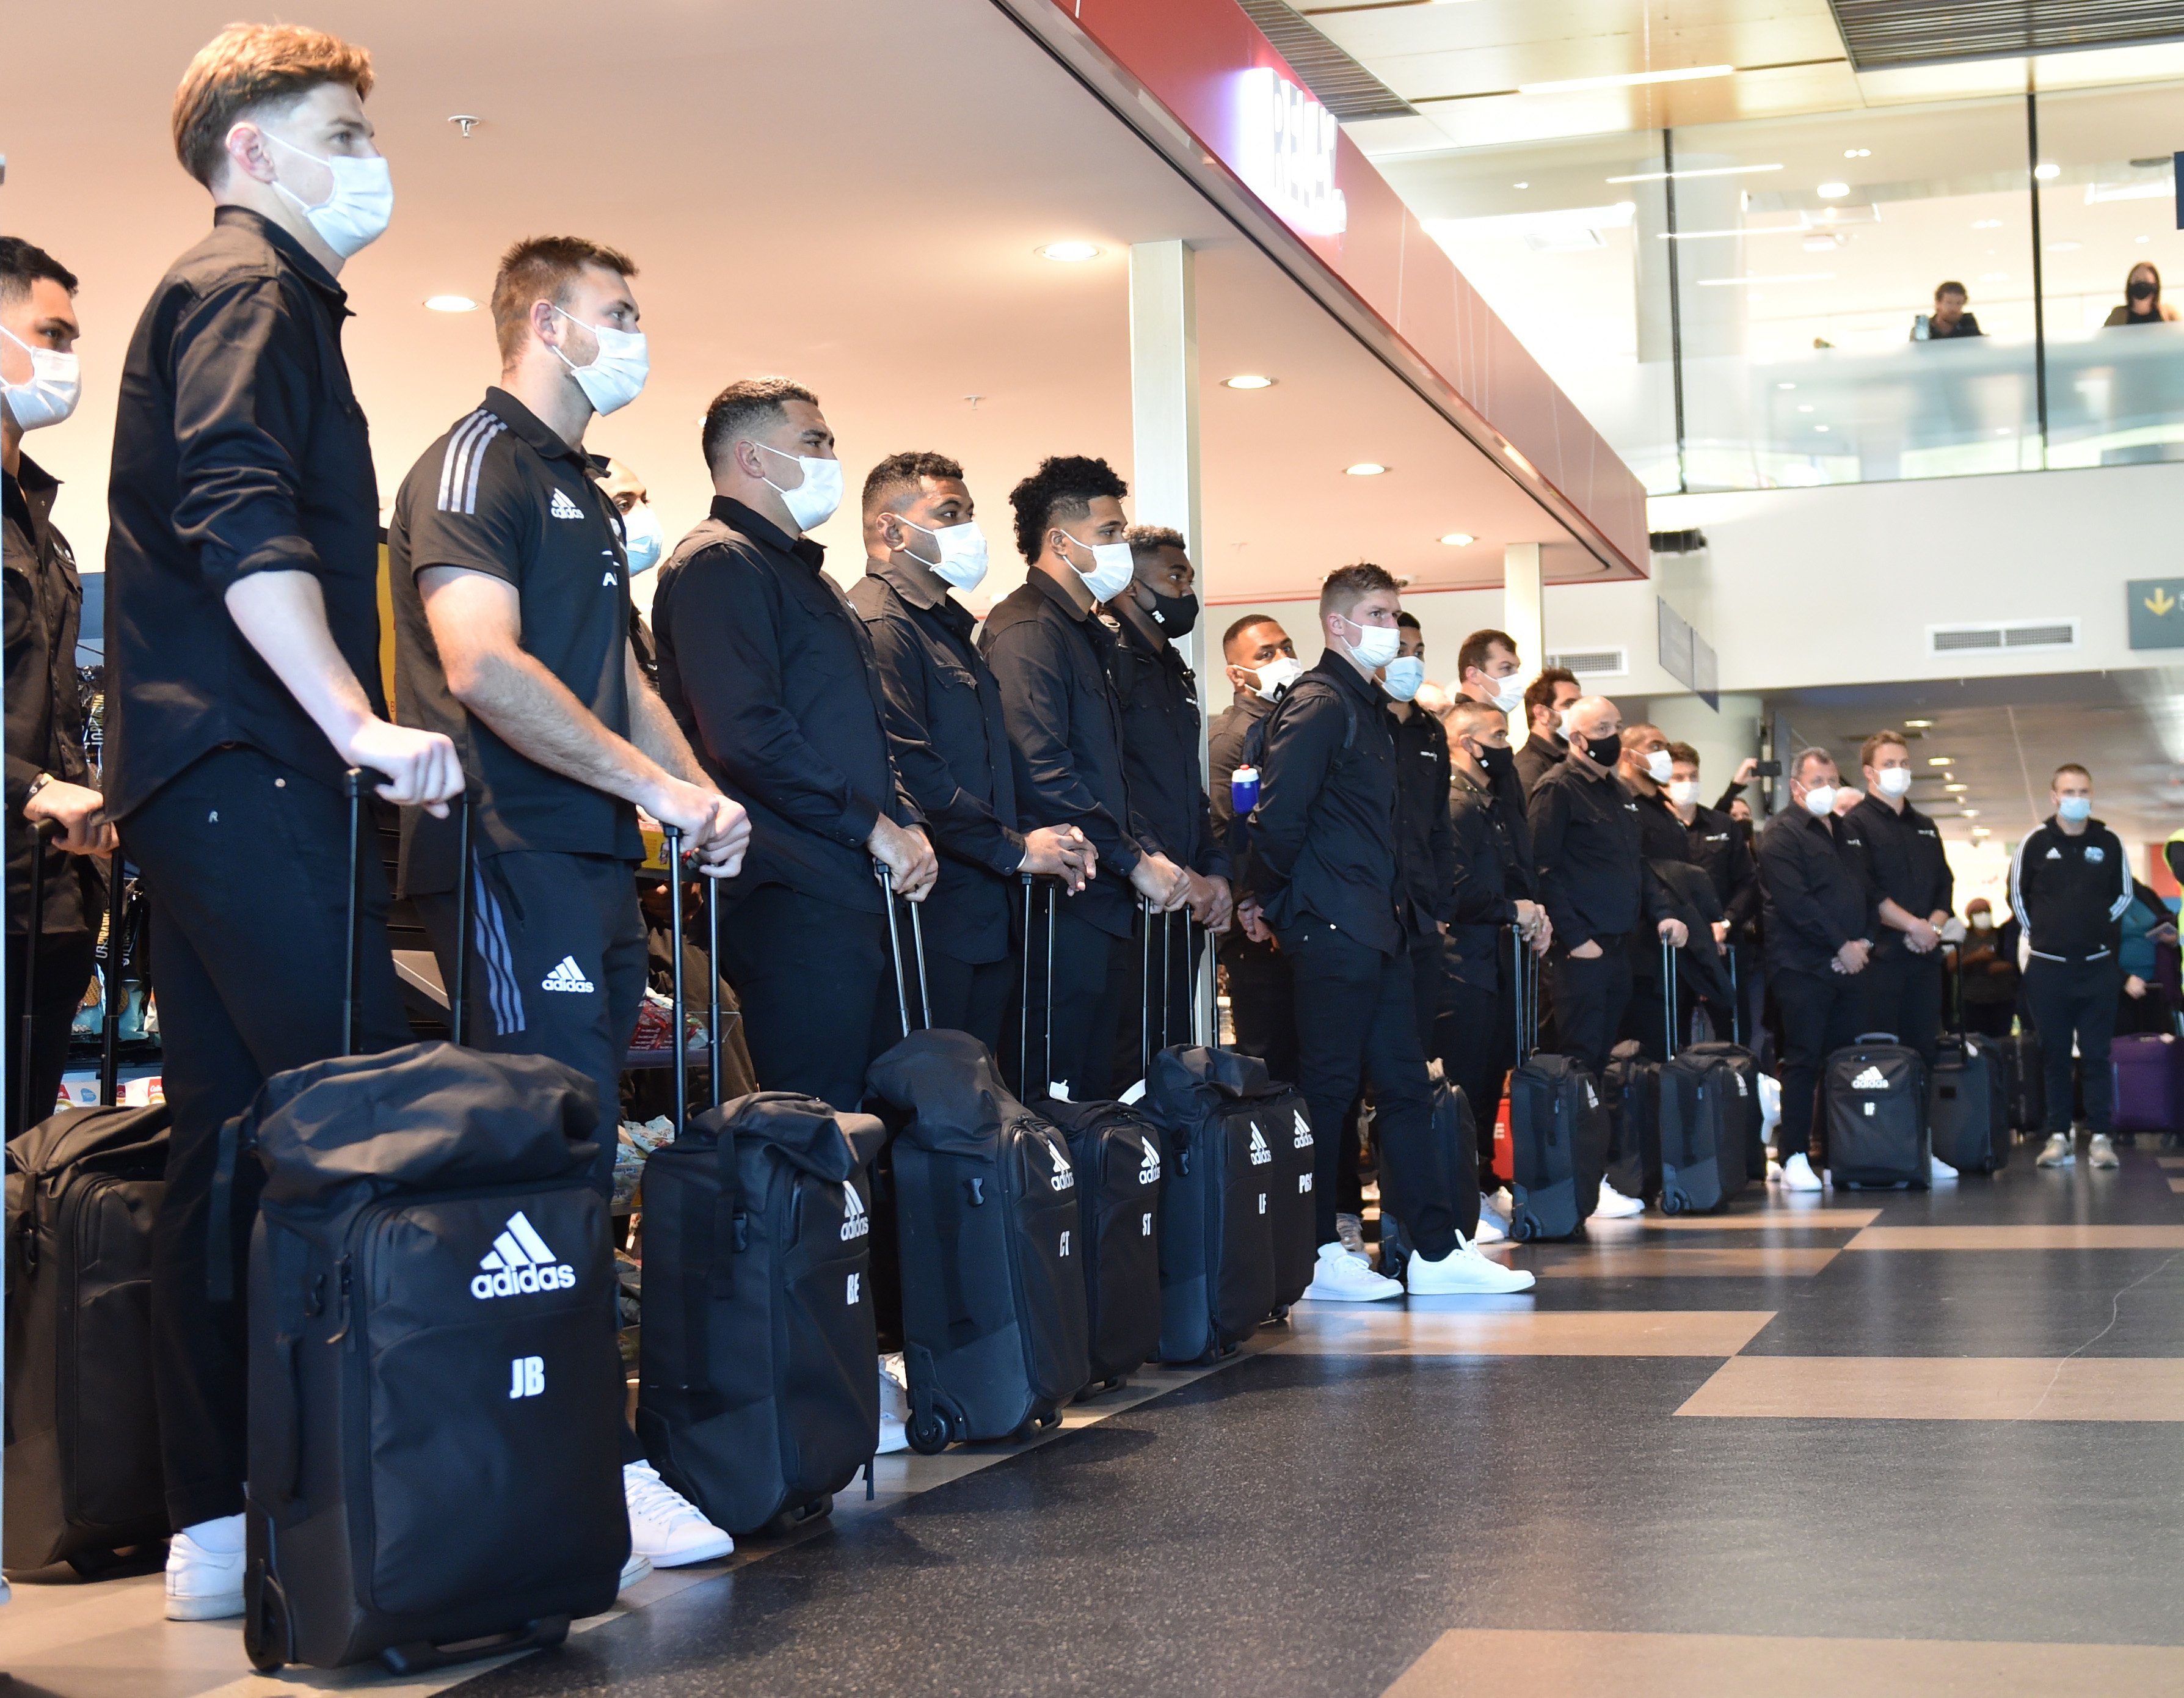 The All Blacks were welcomed at Dunedin Airport this afternoon. PHOTO: GREGOR RICHARDSON